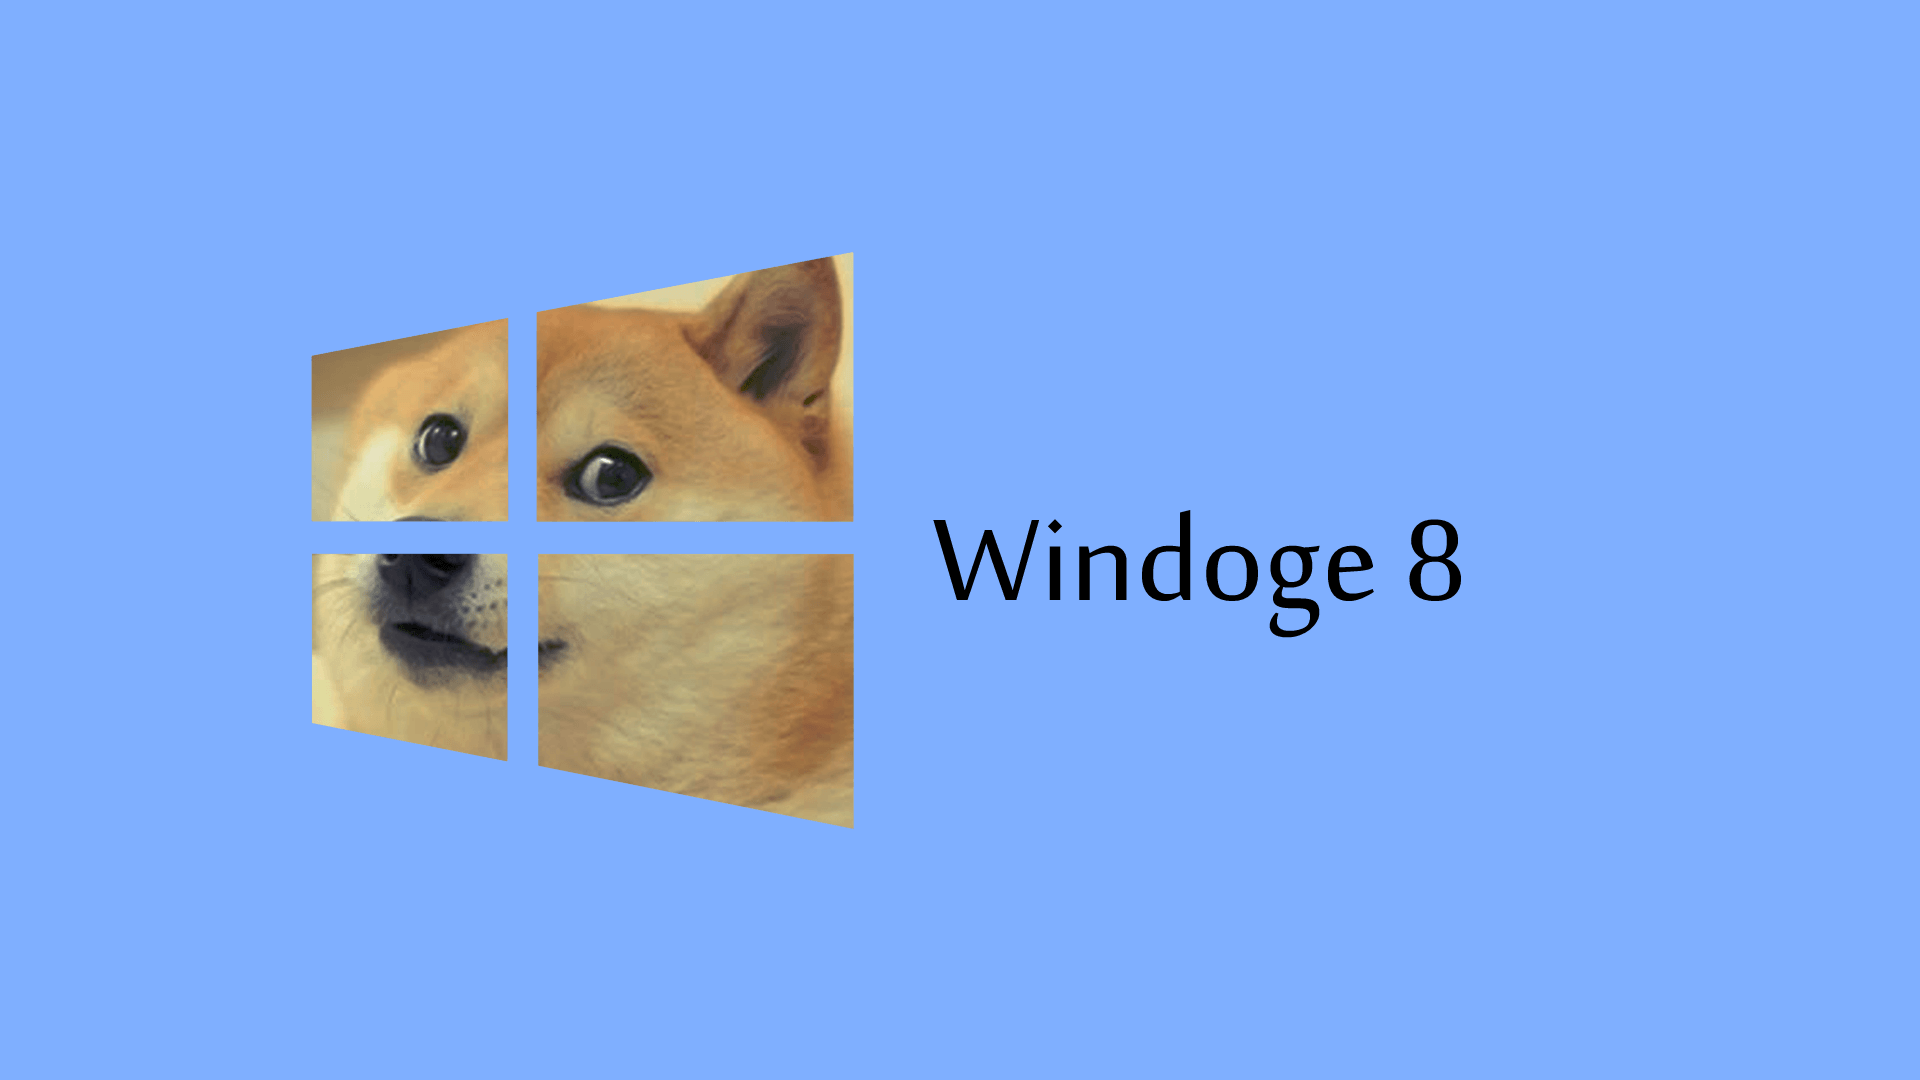 I made a few Windoge 8 wallpaper because who wouldn't want